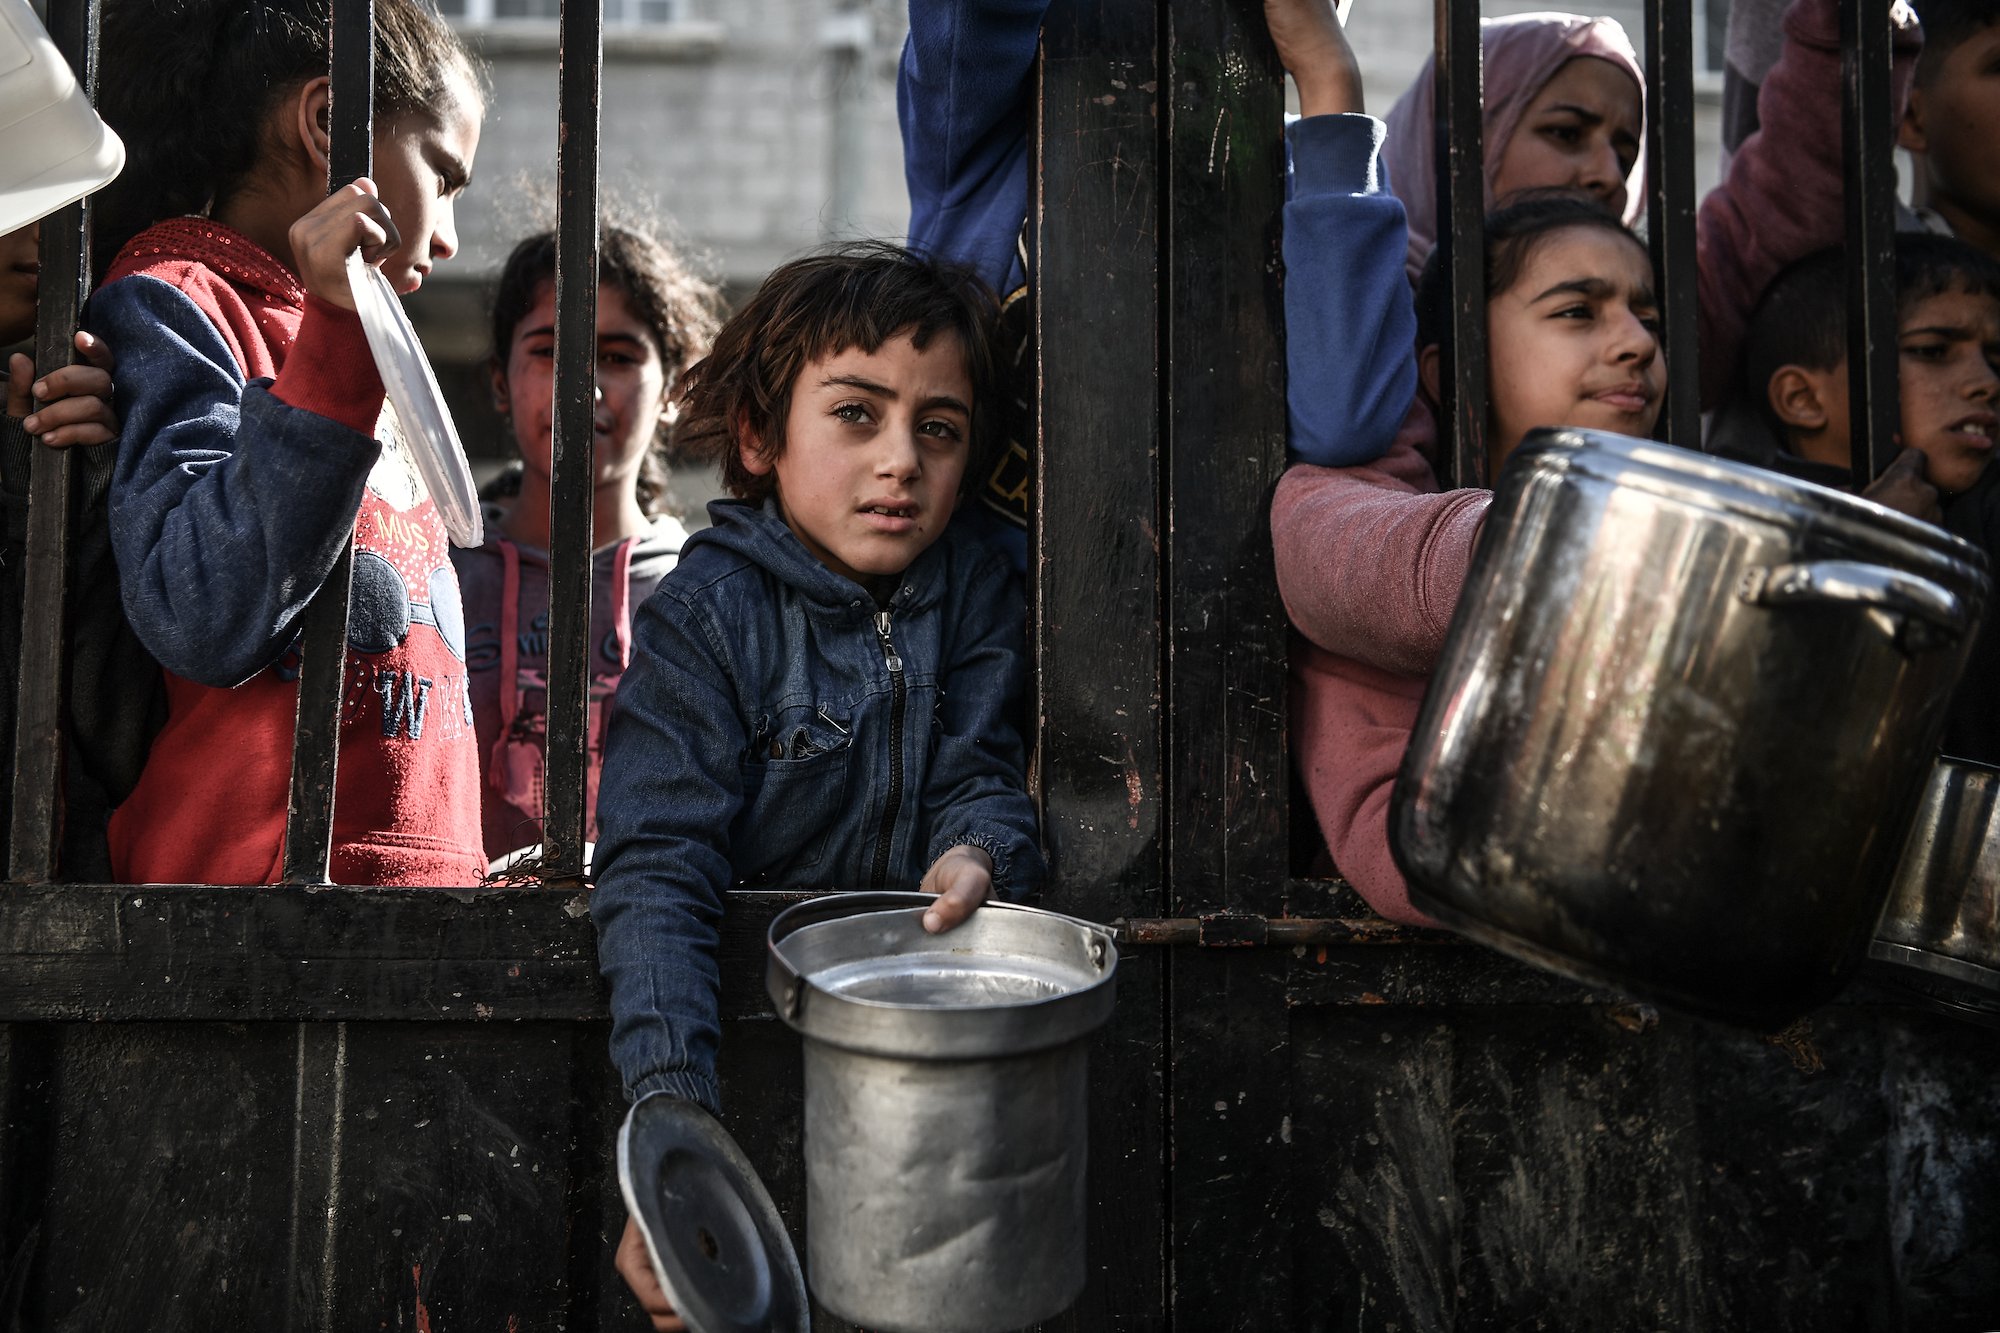 children and women holding container from behind bars